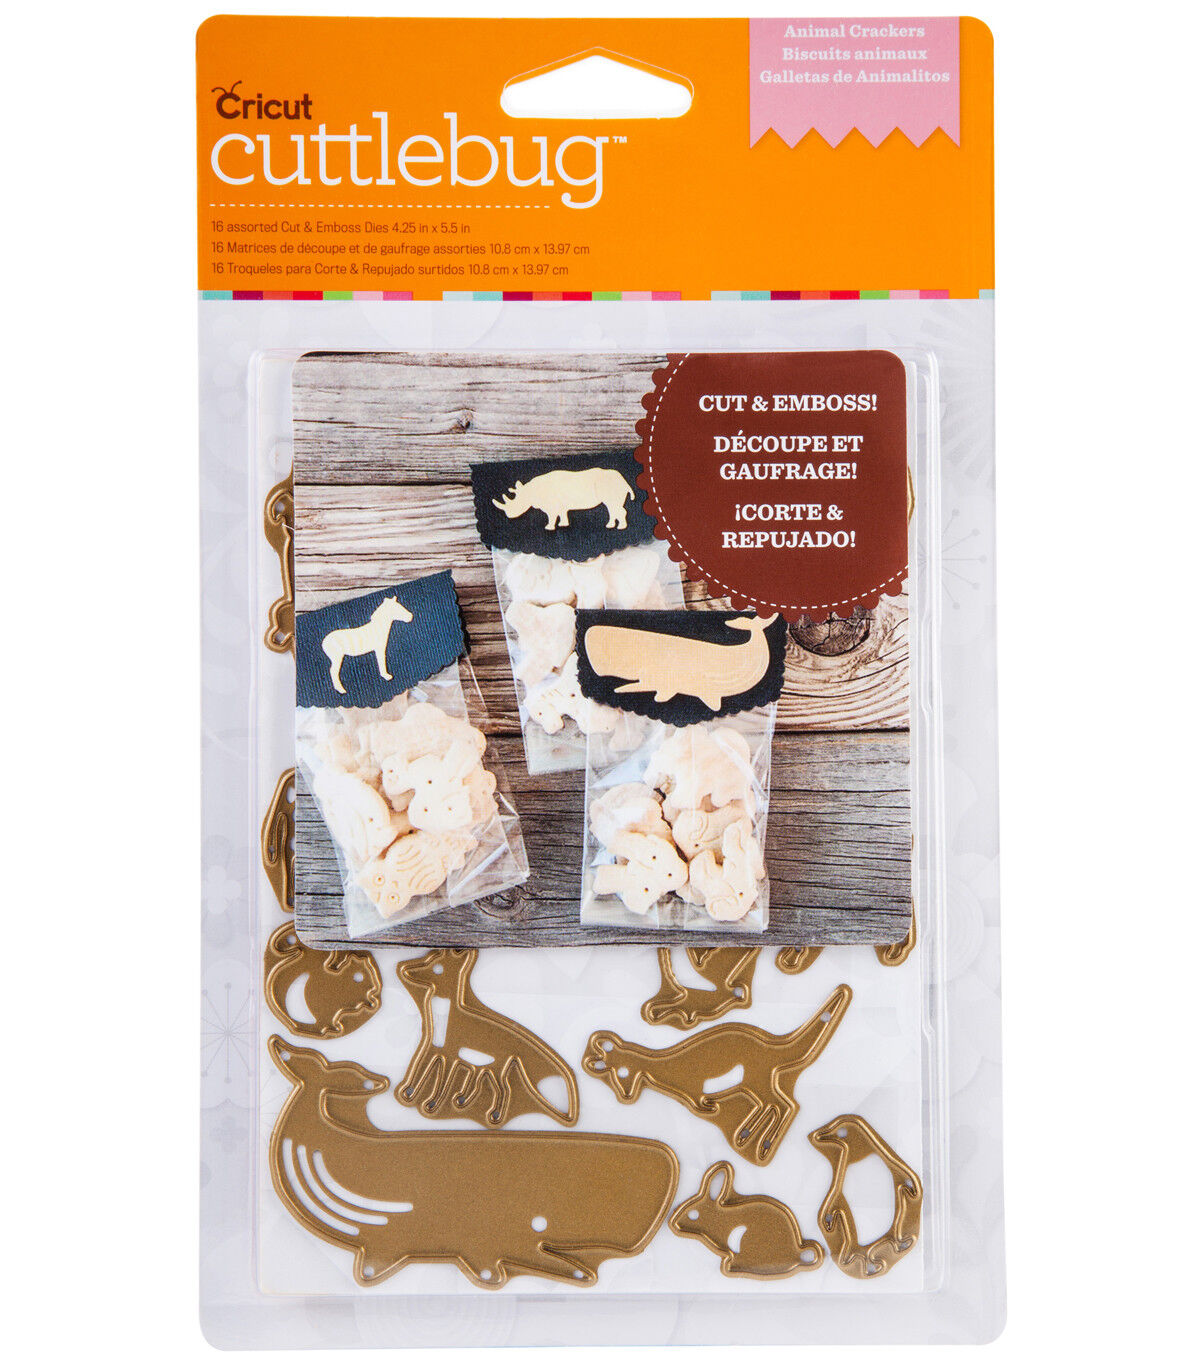 Cricut Cuttlebug ANIMAL CRACKERS Cut and Emboss Dies (small) Brand New in Pkg